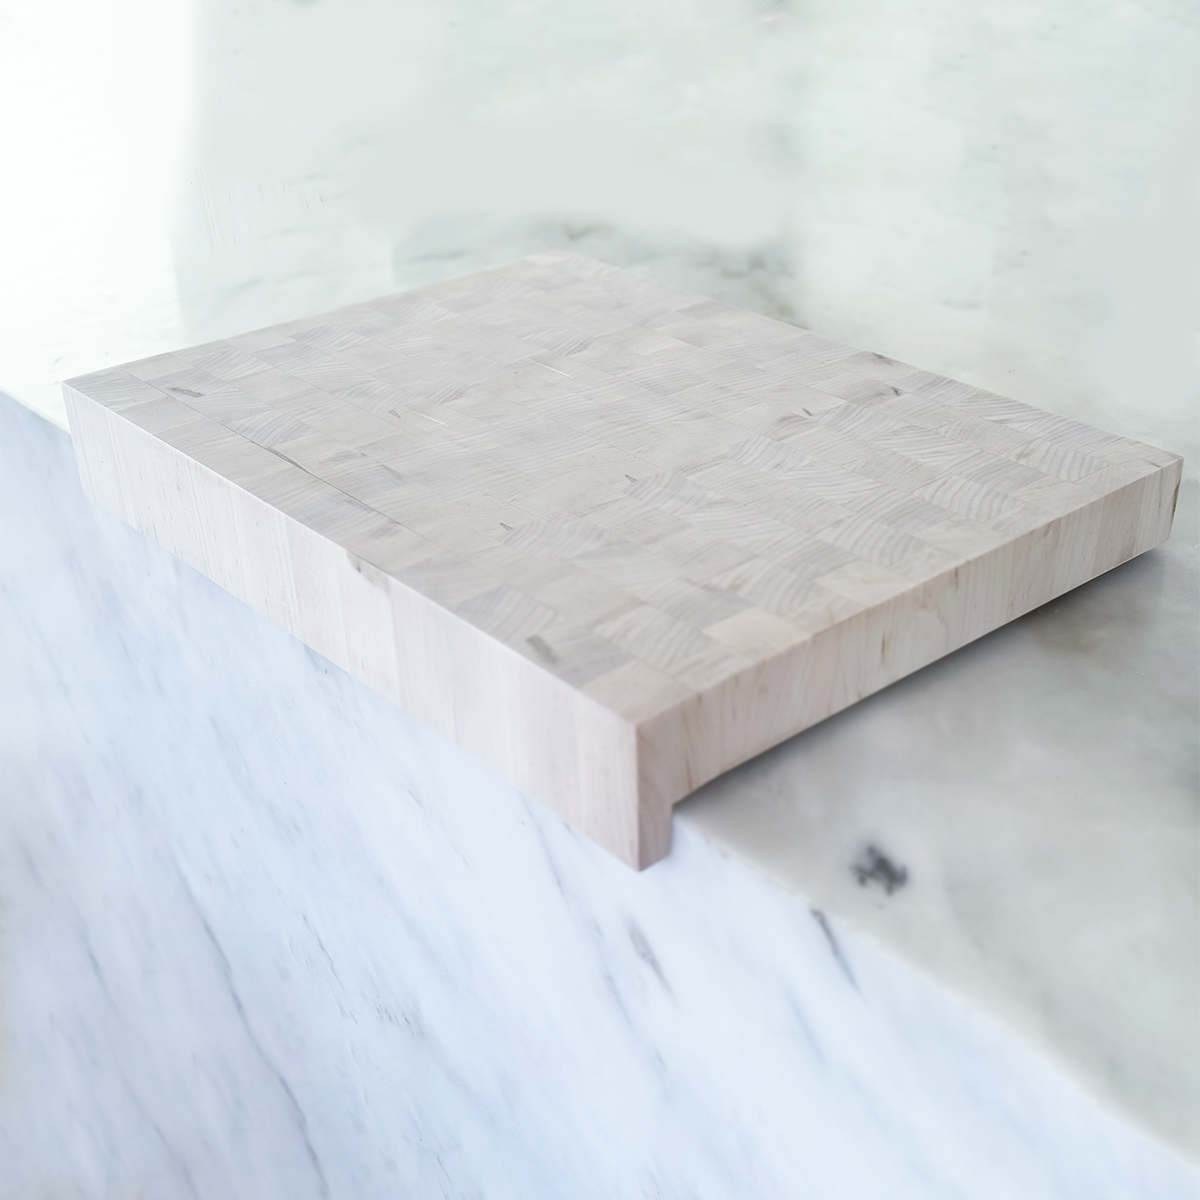 Bleached Maple Over The Counter End Grain Cutting Board "The Hazelton XL"